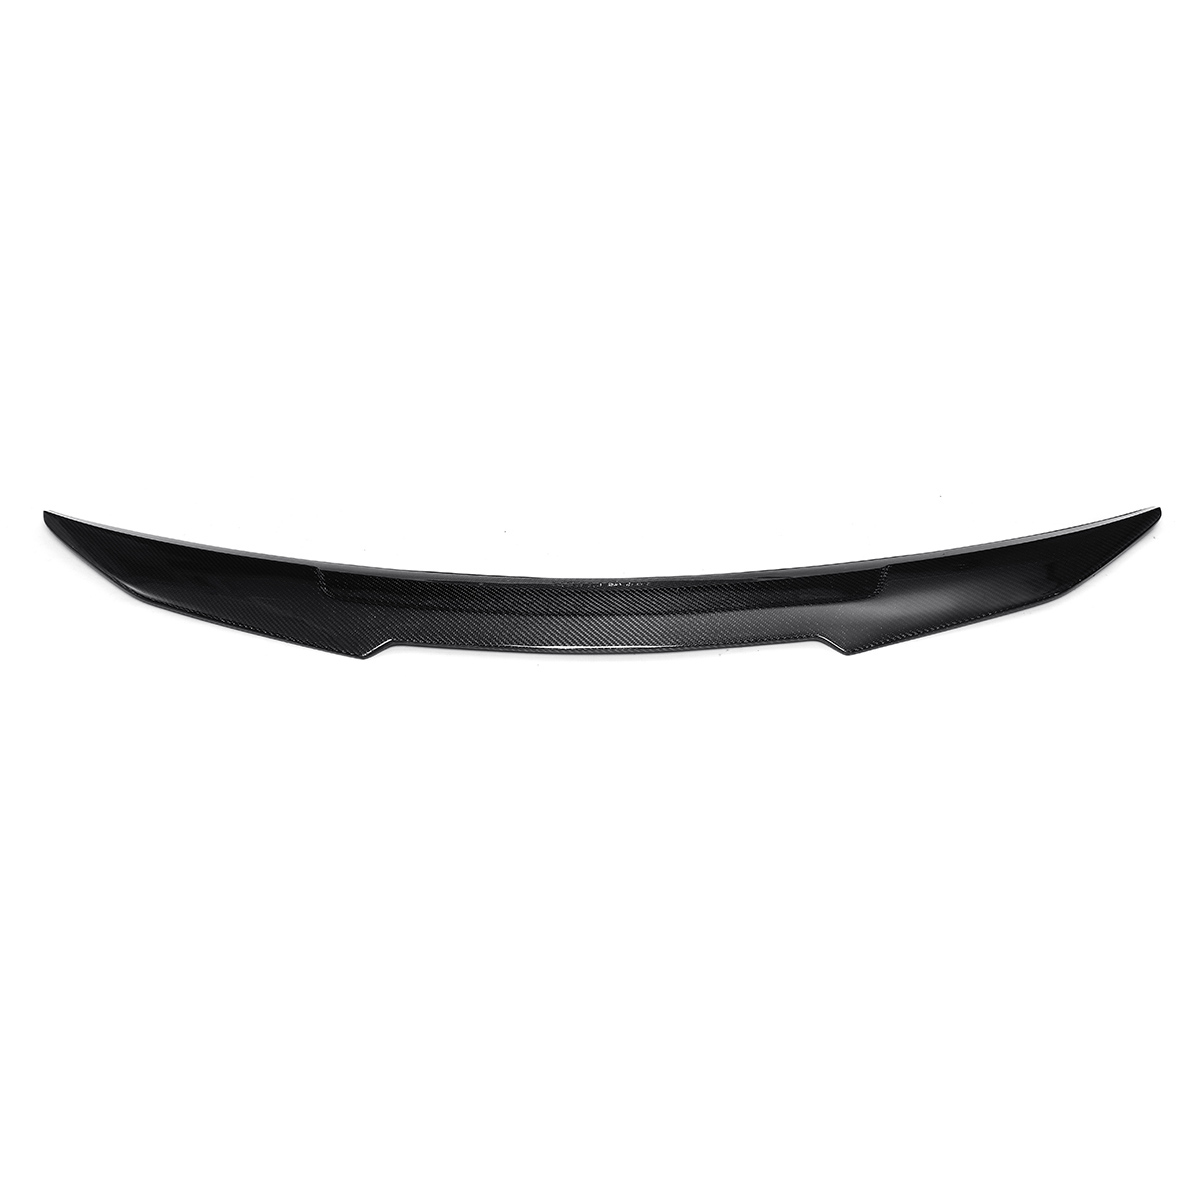 Car-Real-Carbon-Fiber-Board-Rear-Spoiler-Wing-For-Mercedes-Benz-C-Class-W204-C63-AMG-2008-2014-1568876